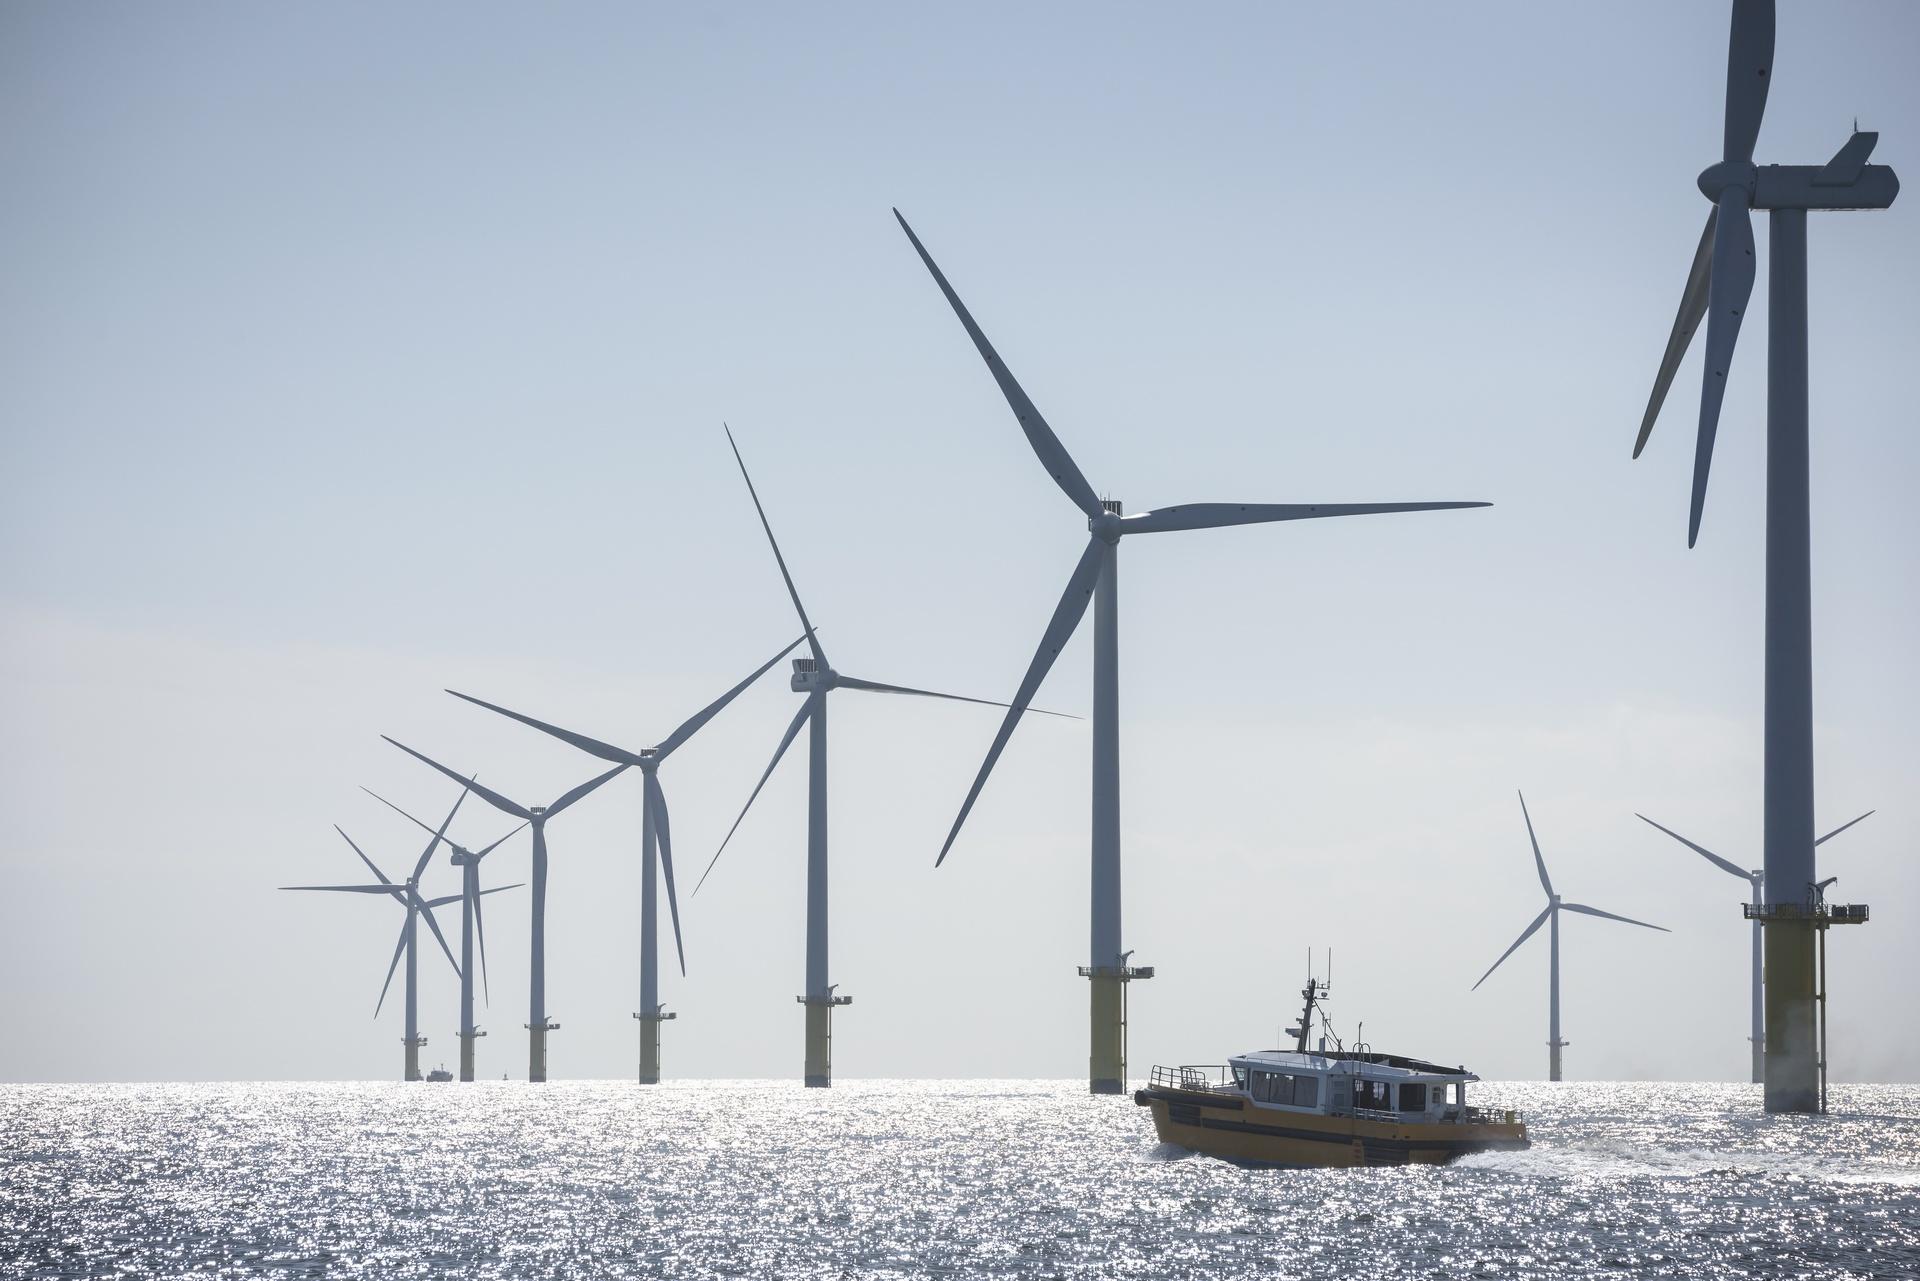 OMCE, Vessels out by wind farms, ORE Catapult